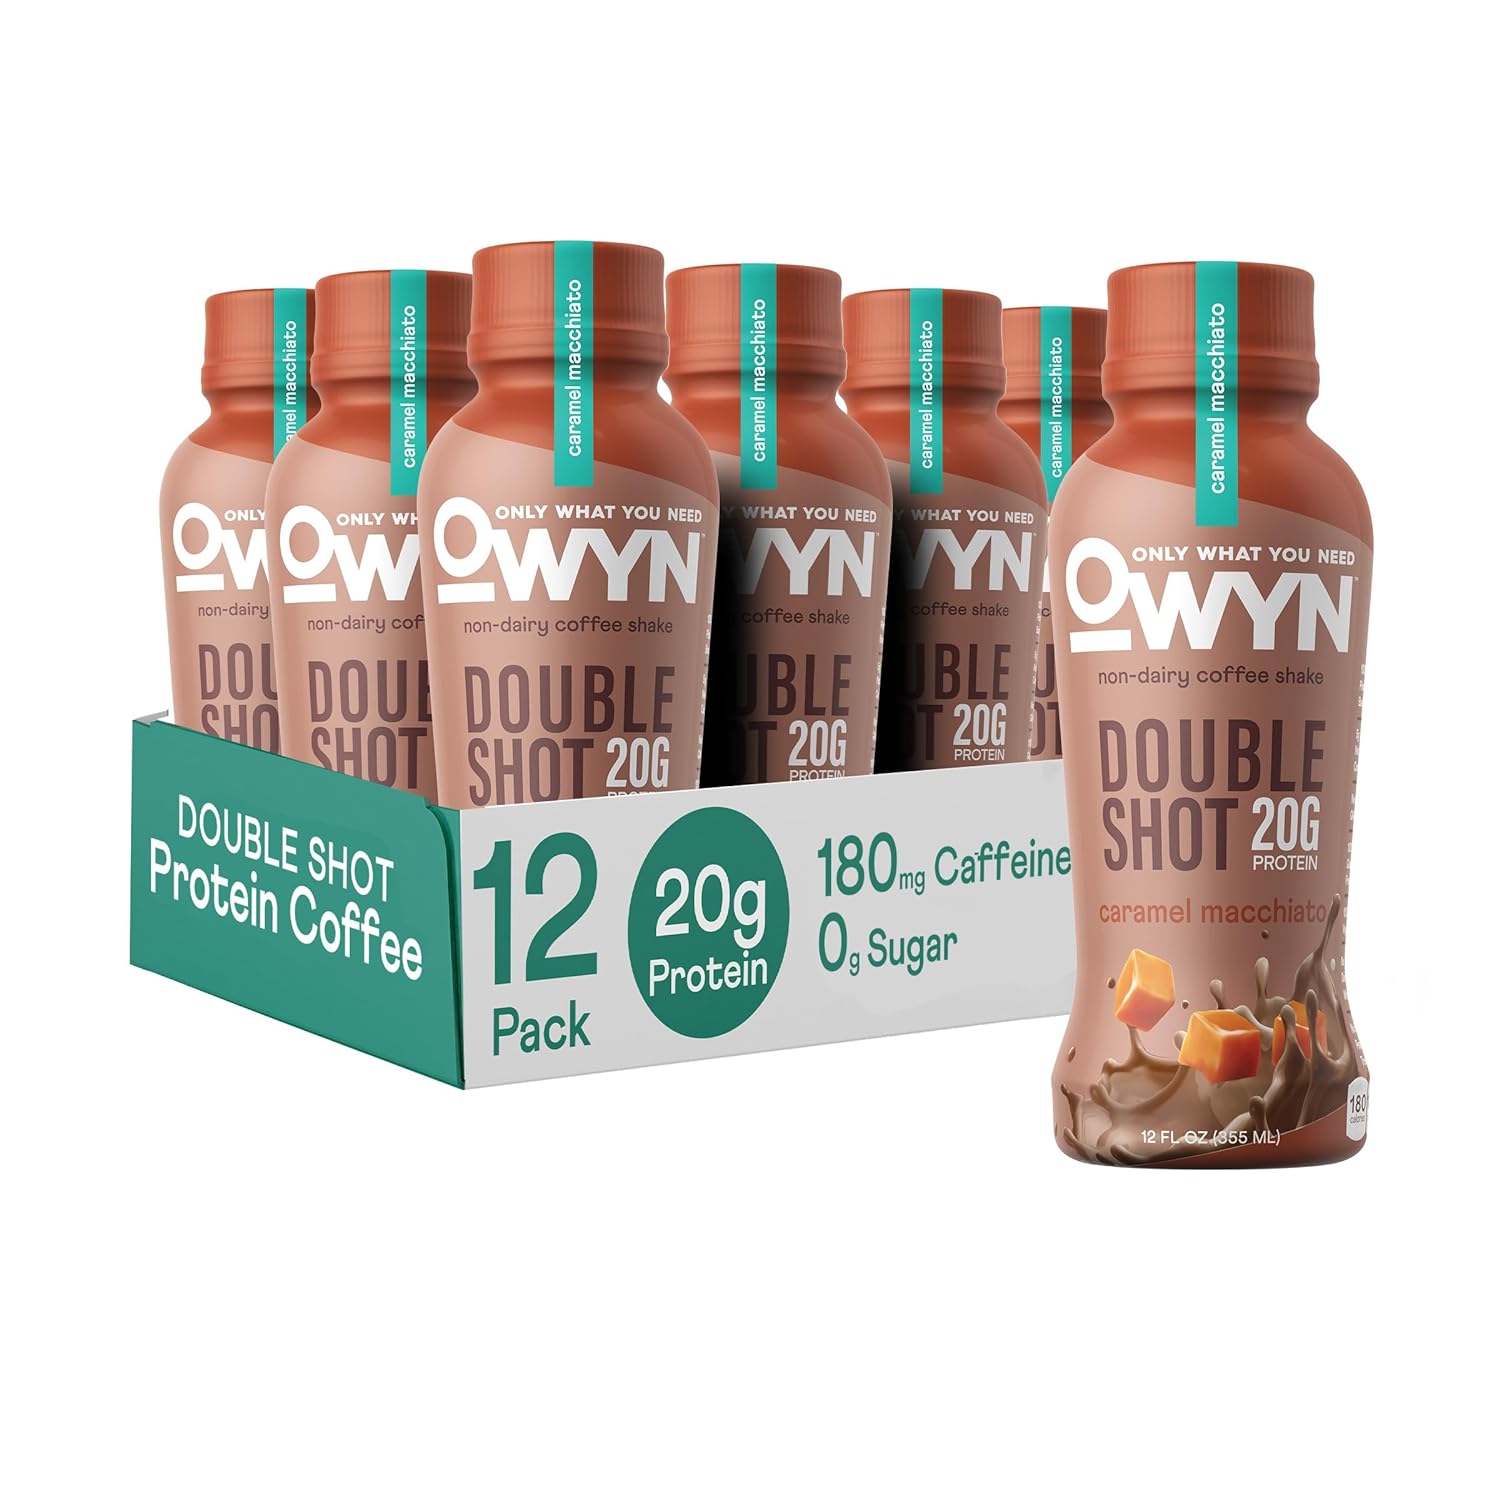 OWYN Only What You Need Double Shot Dairy-Free Keto Protein Coffee Shake